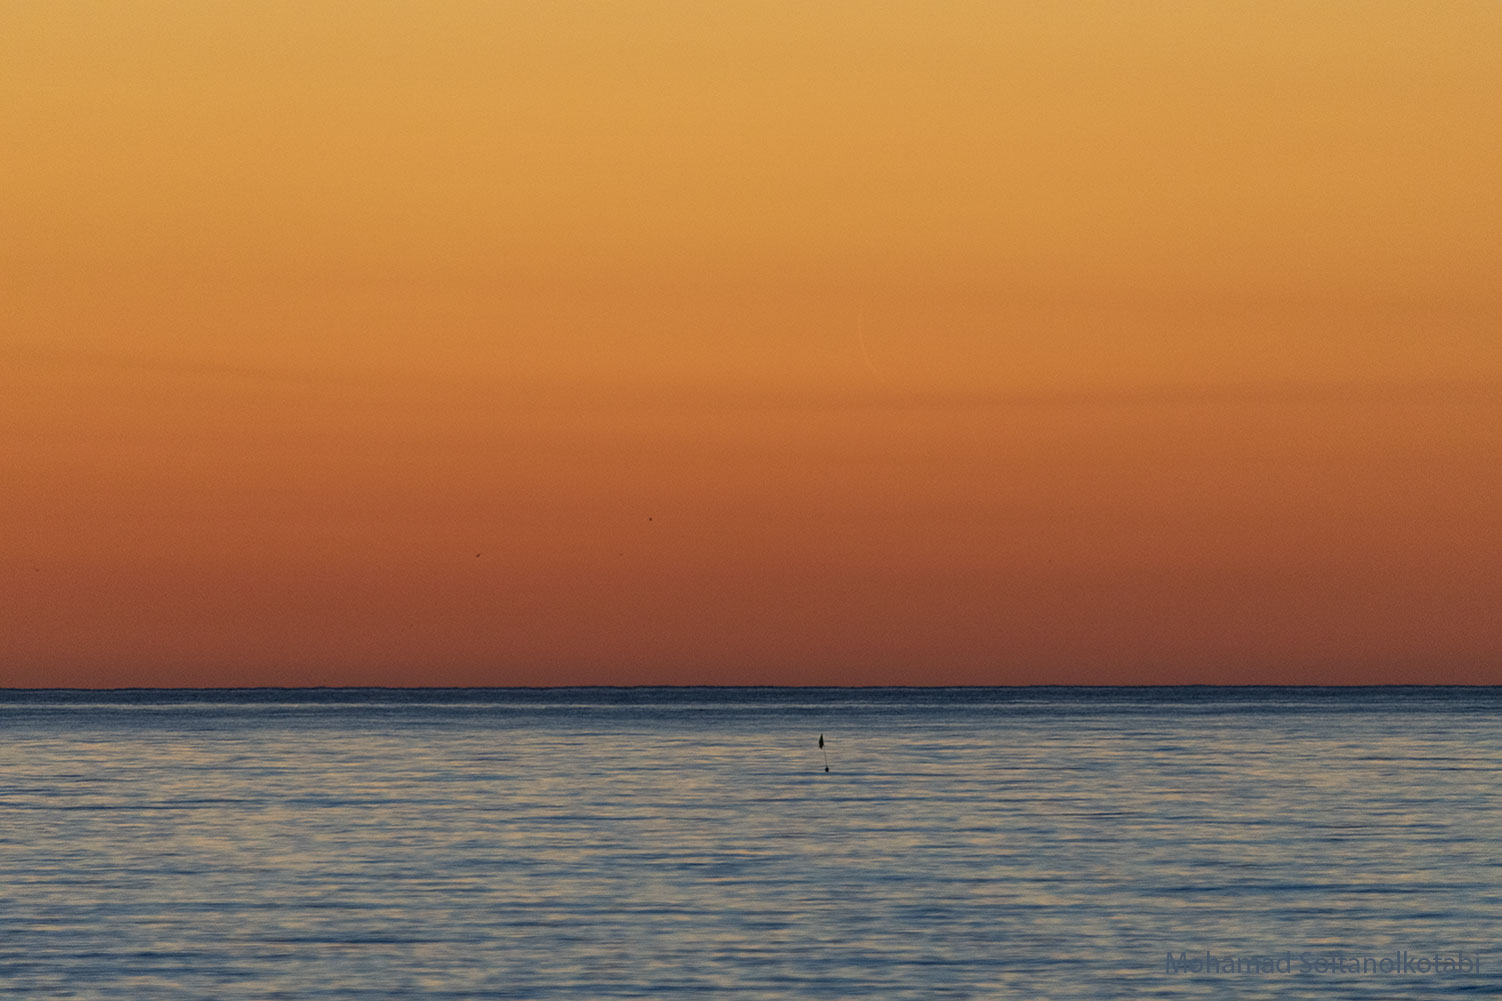 The featured image shows an orange sky over water with 
a very faint, slight crescent Moon in the sky. 
Please see the explanation for more detailed information.